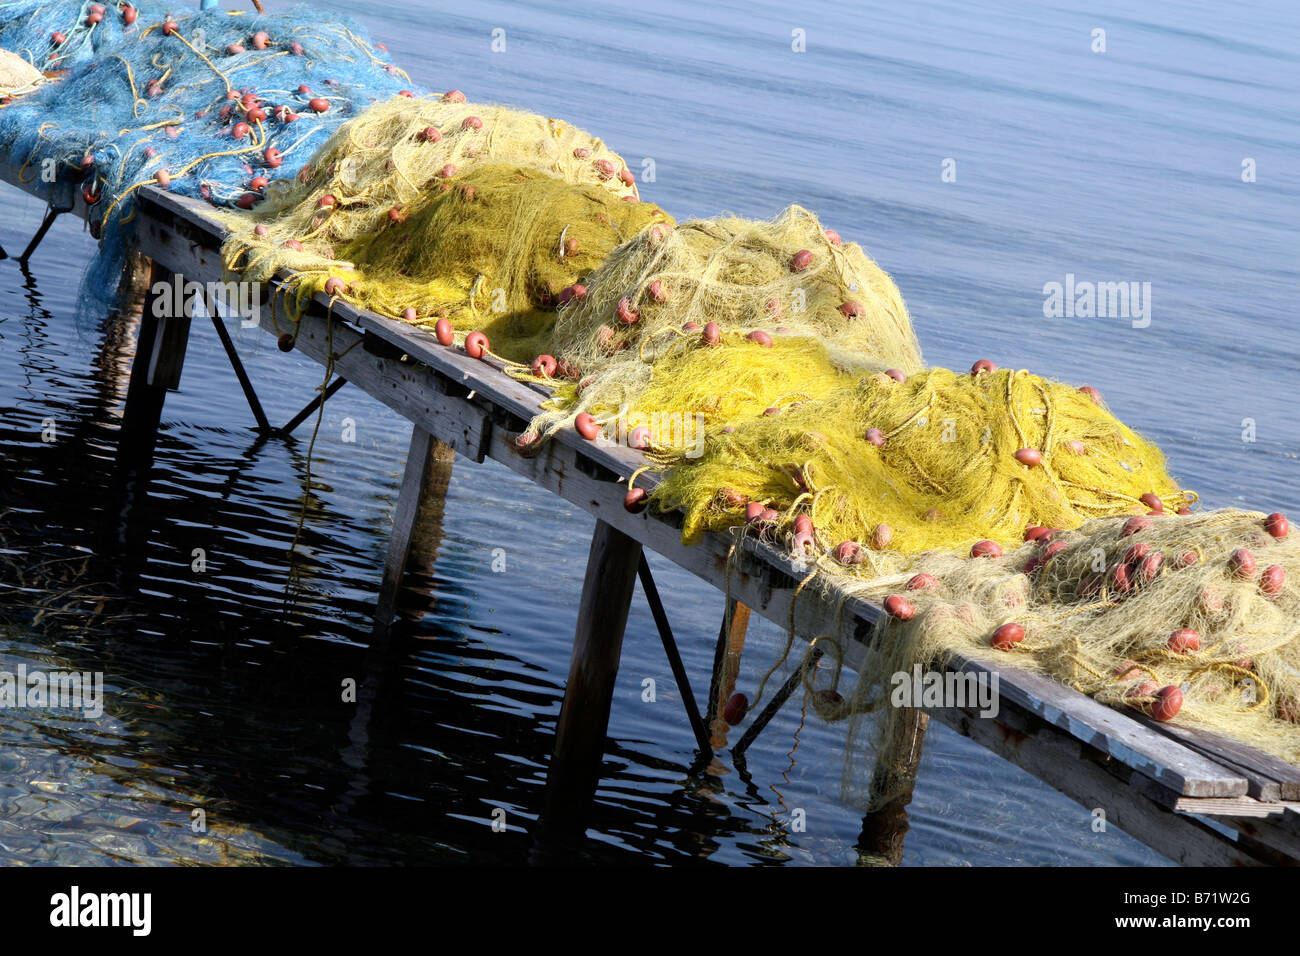 Piles of fishing nets on a jetty Stock Photo